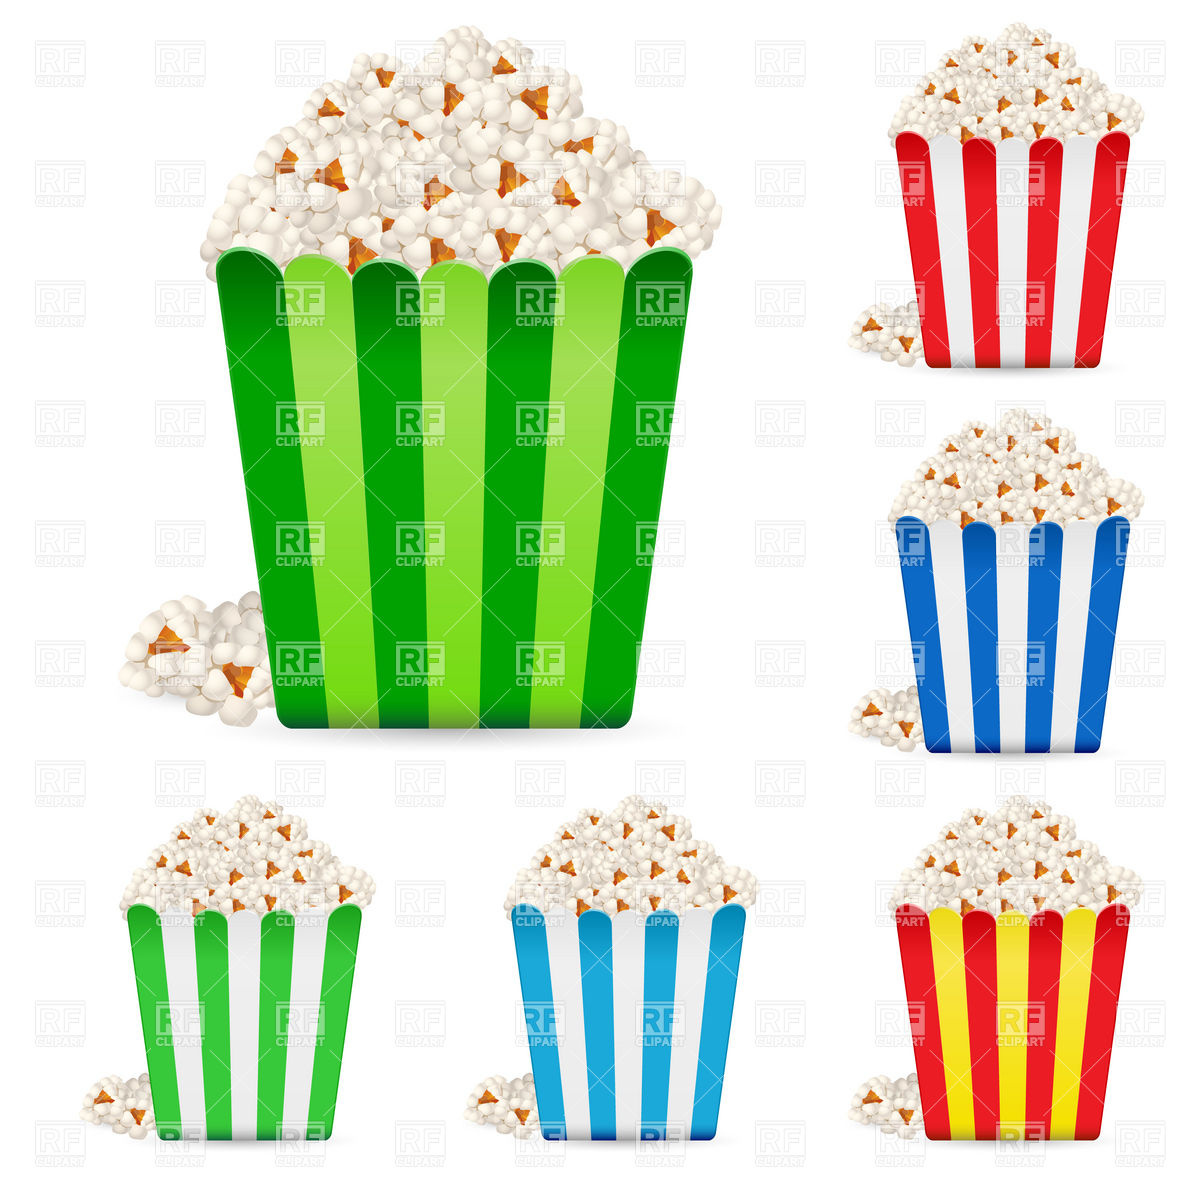 Popcorn In Multi Colored Stripy Packages 8219 Download Royalty Free    